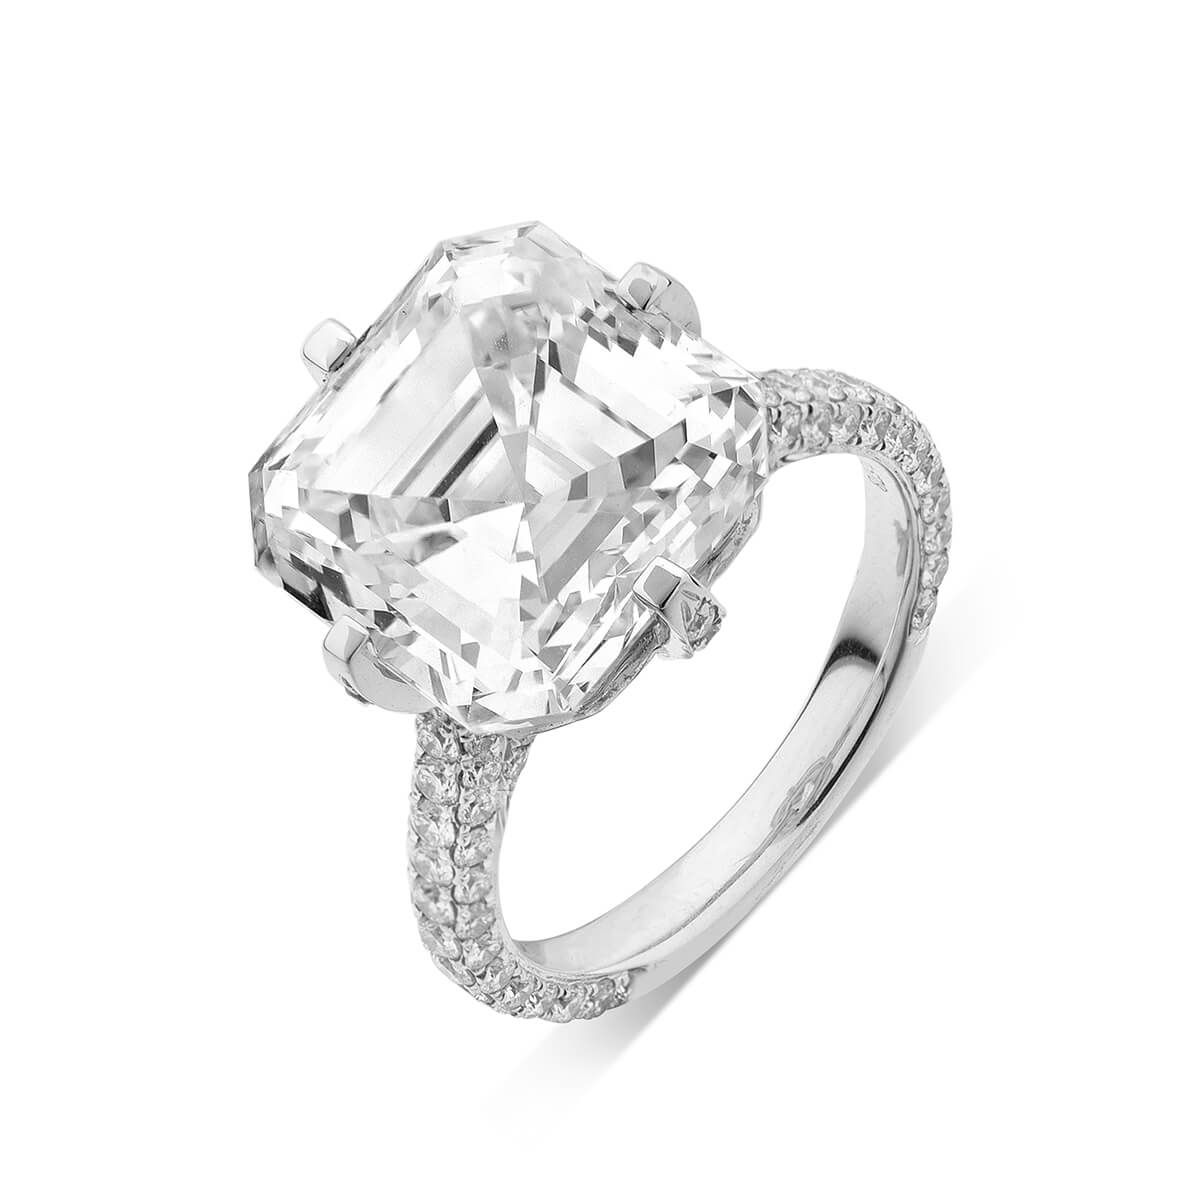  White Diamond Ring, 10.01 Ct. (11.12 Ct. TW), Asscher shape, GIA Certified, 5182900538